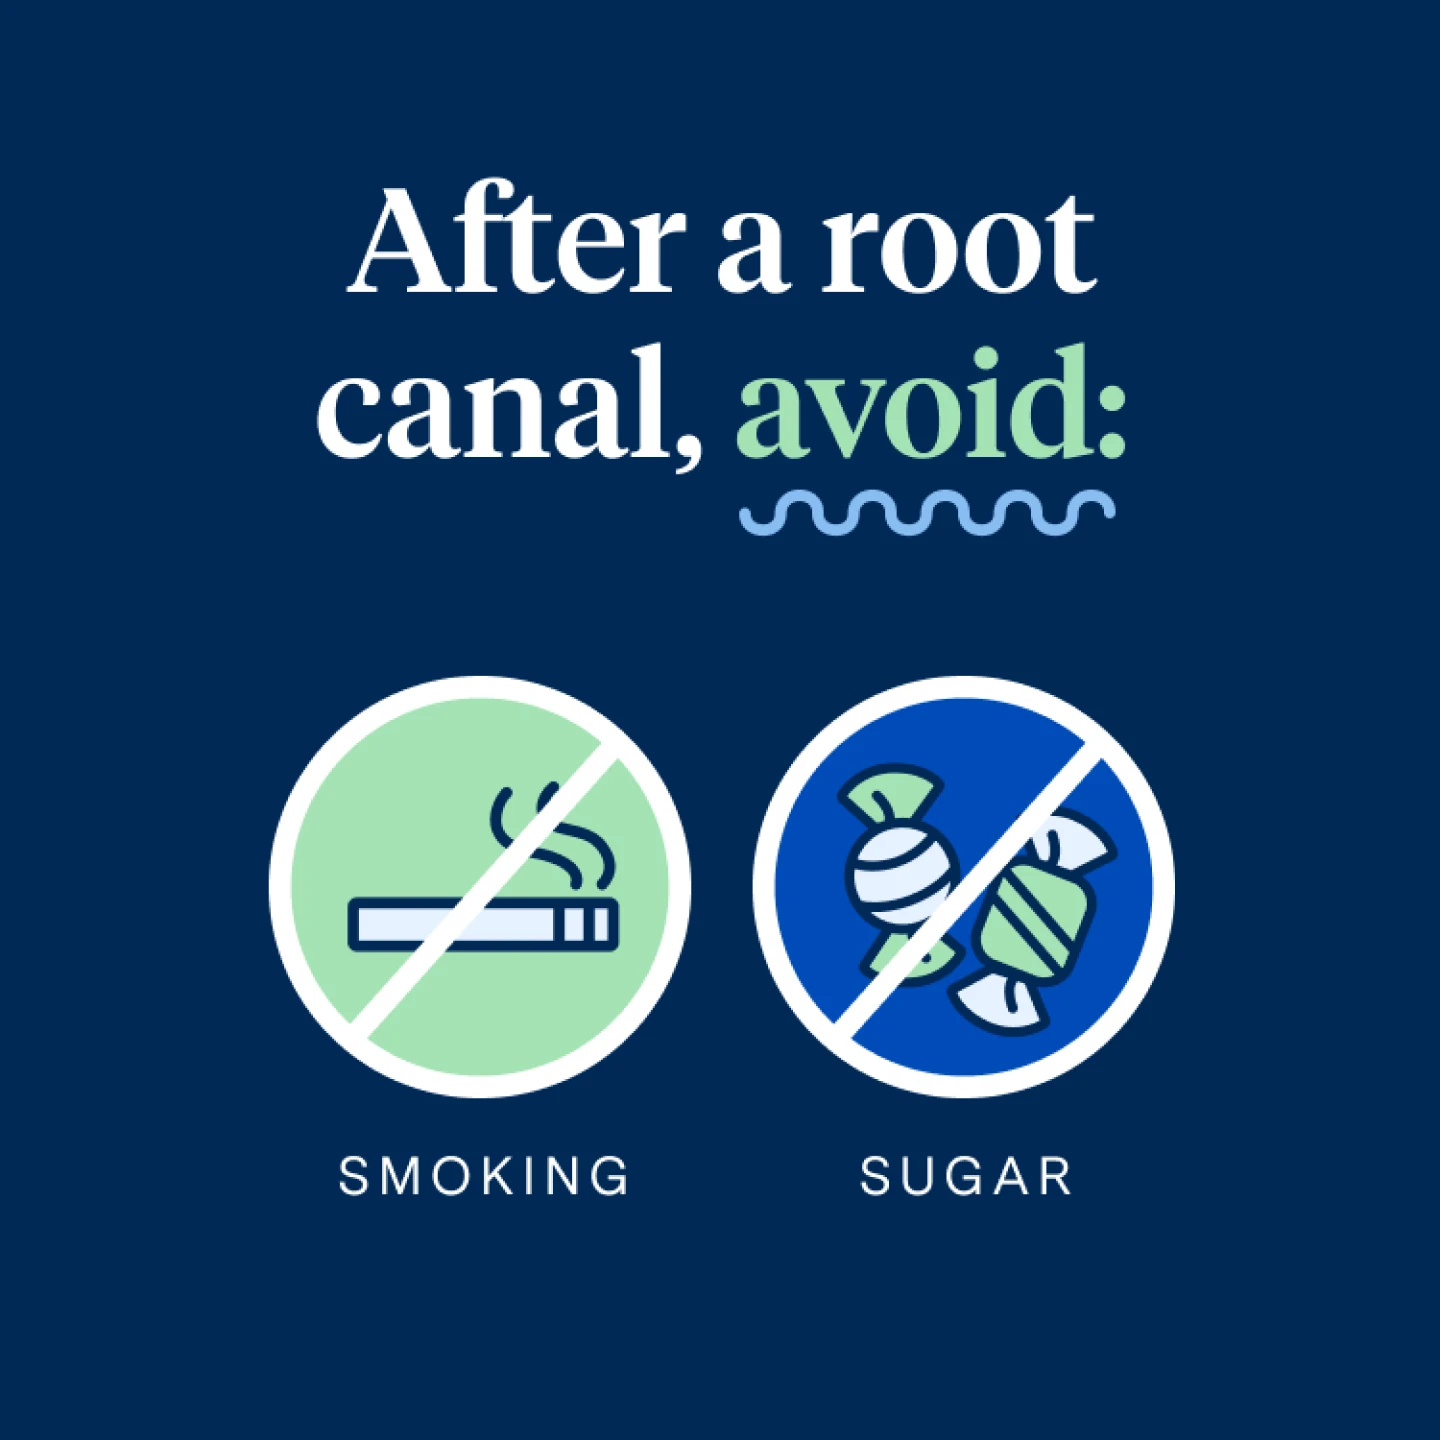 After a root canal, avoid smoking and sugar. 